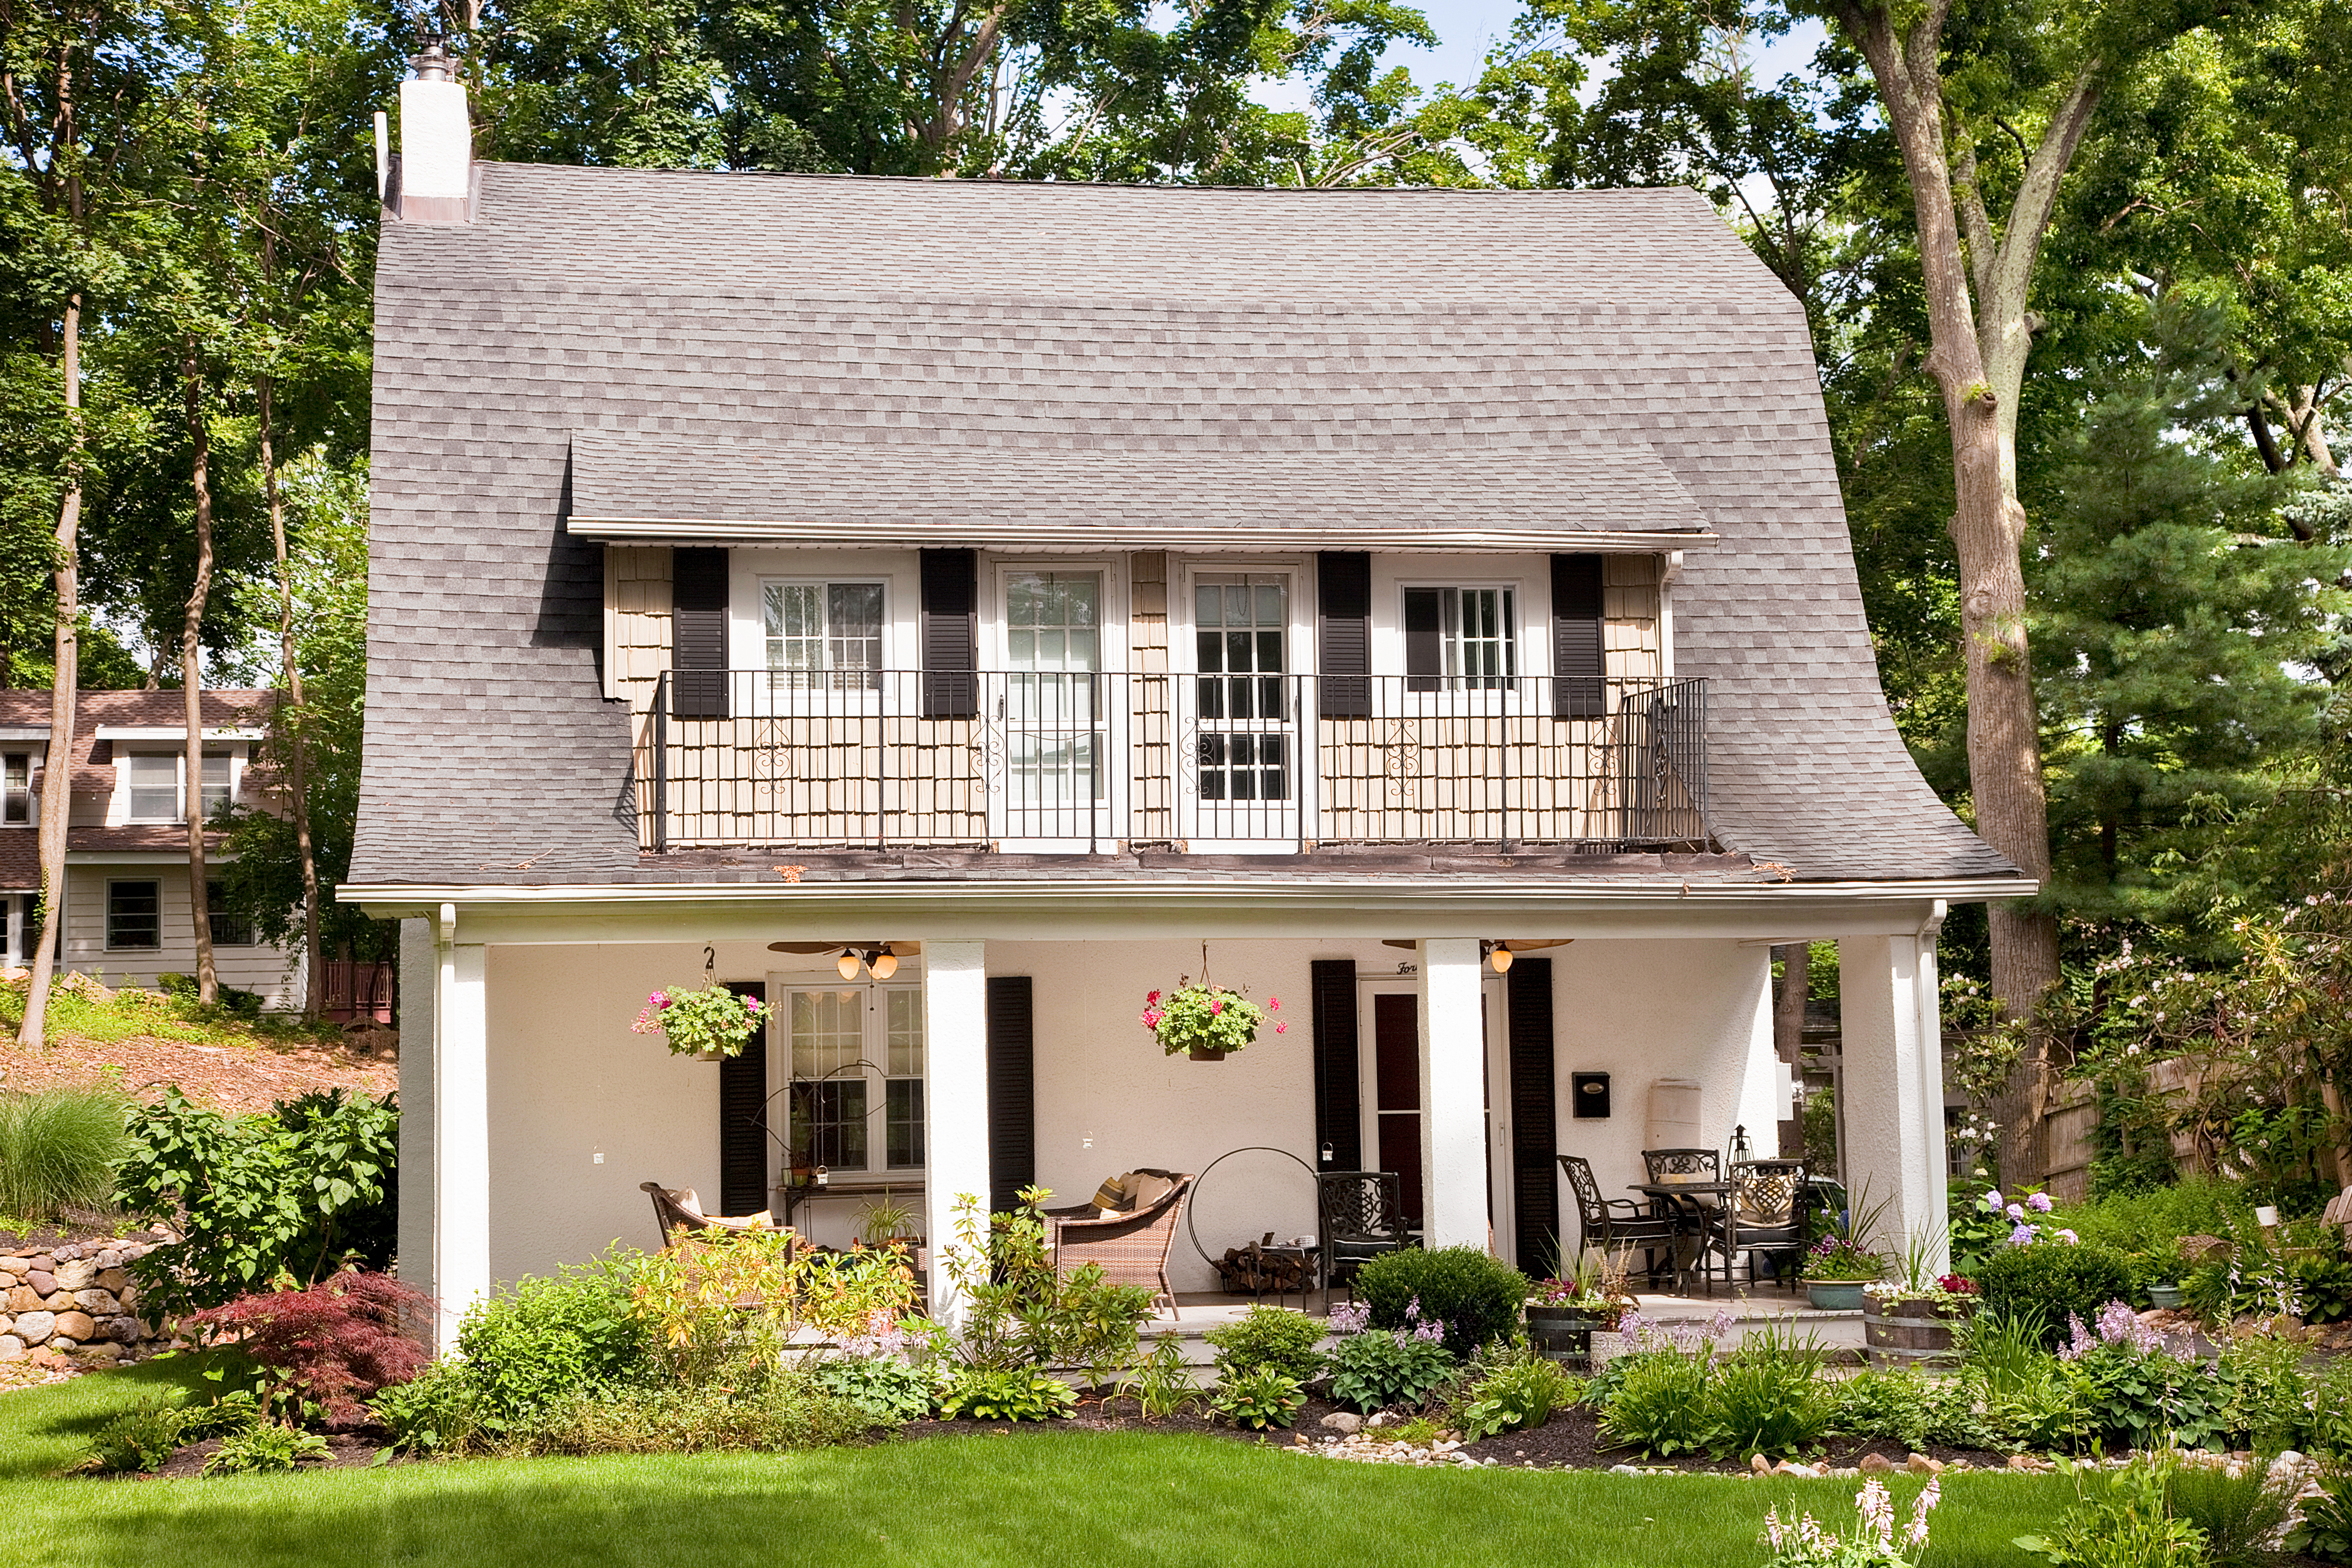 A two-story white and tan cottage with black window finishings, a front porch with furniture, a chimney, and a well-manicured lawn and foliage